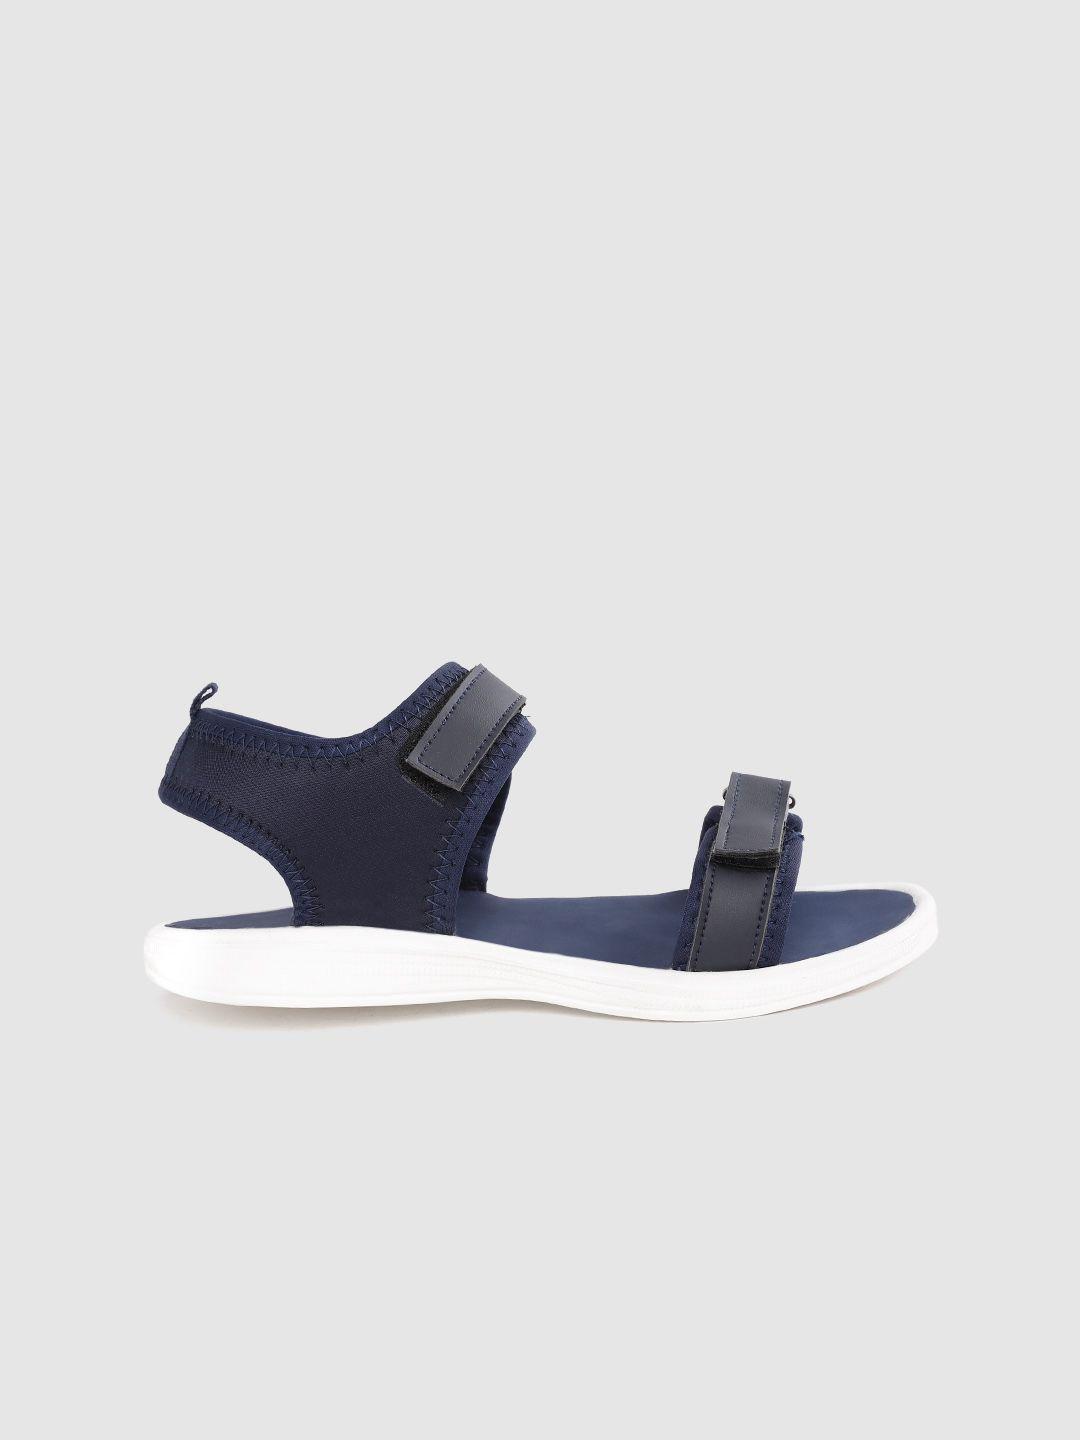 the roadster lifestyle co women navy blue solid sports sandals